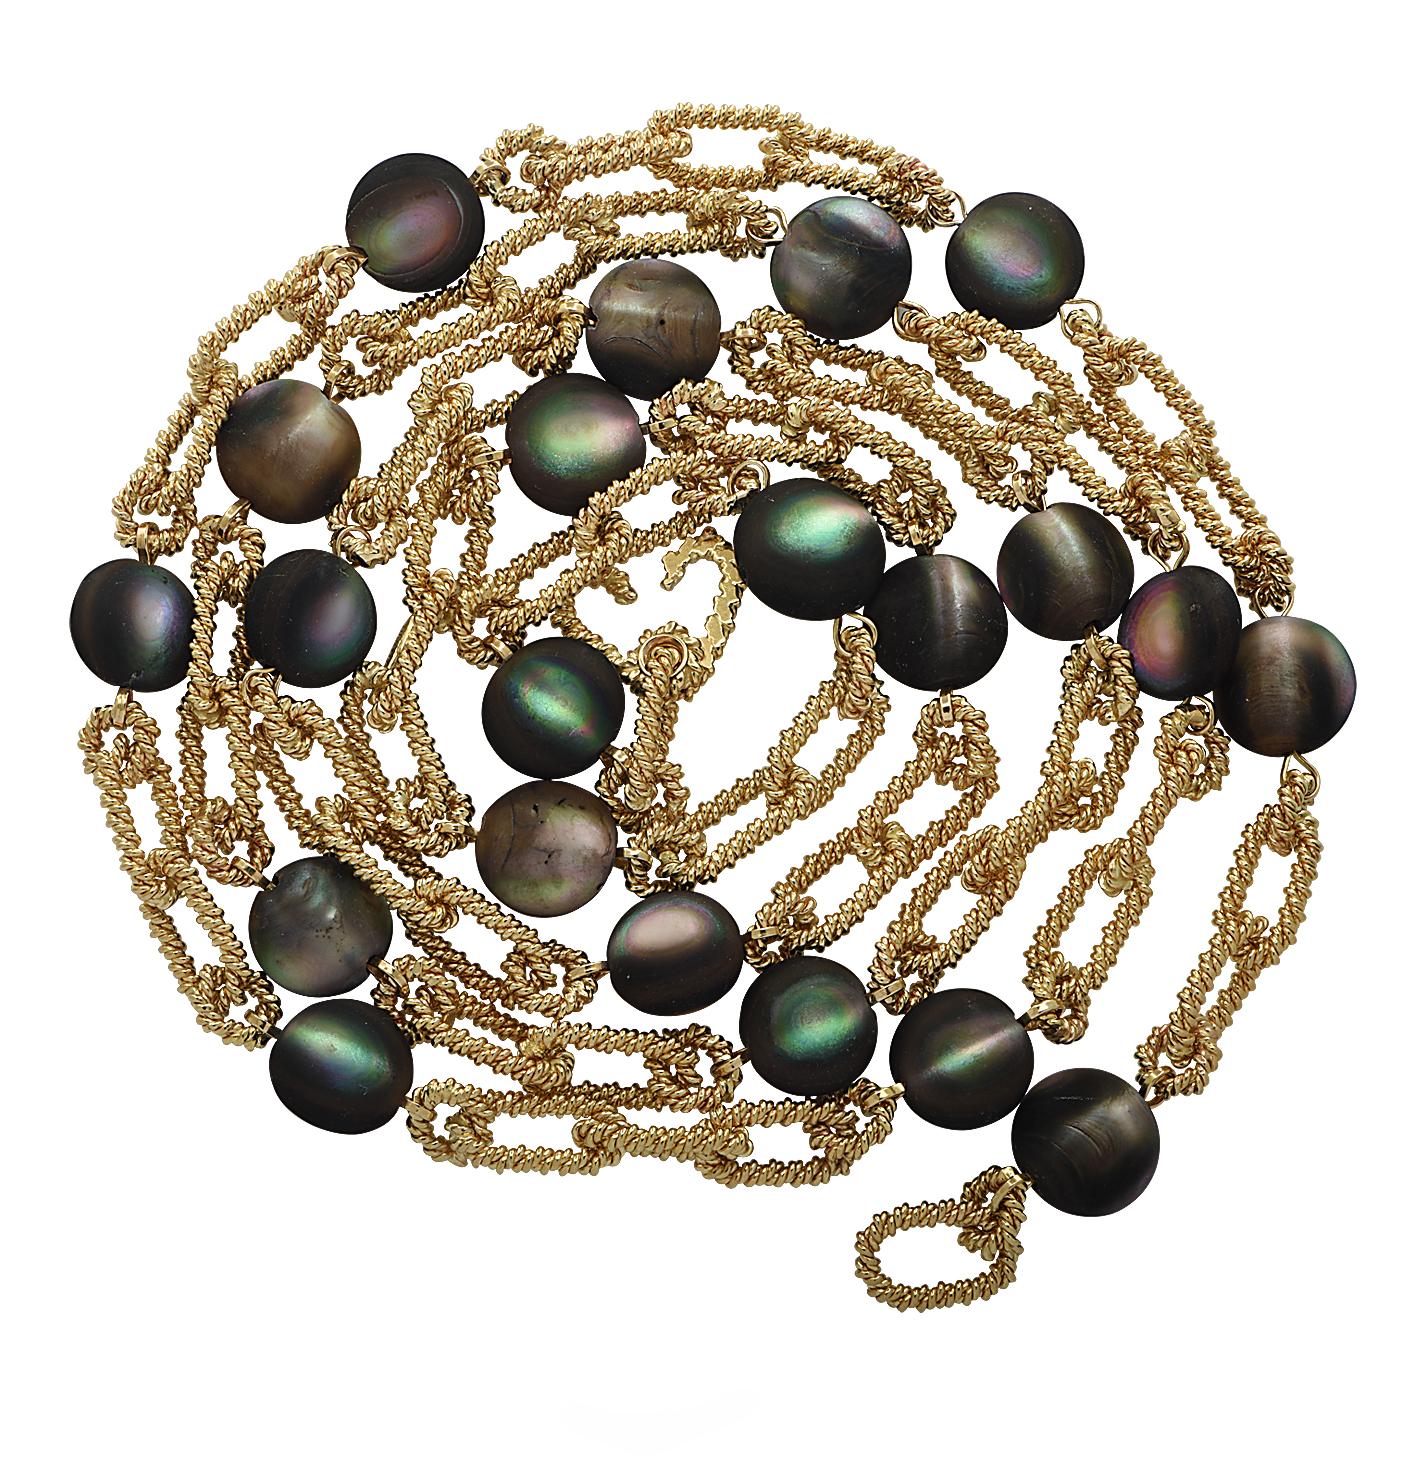 From the iconic House of Tiffany & Co. this vintage necklace, crafted in 18 karat yellow gold, features 21 sensational Cat’s Eye Labradorite cabochons. The necklace is fashioned from twisted yellow gold links interspersed with cat’s eye labradorite